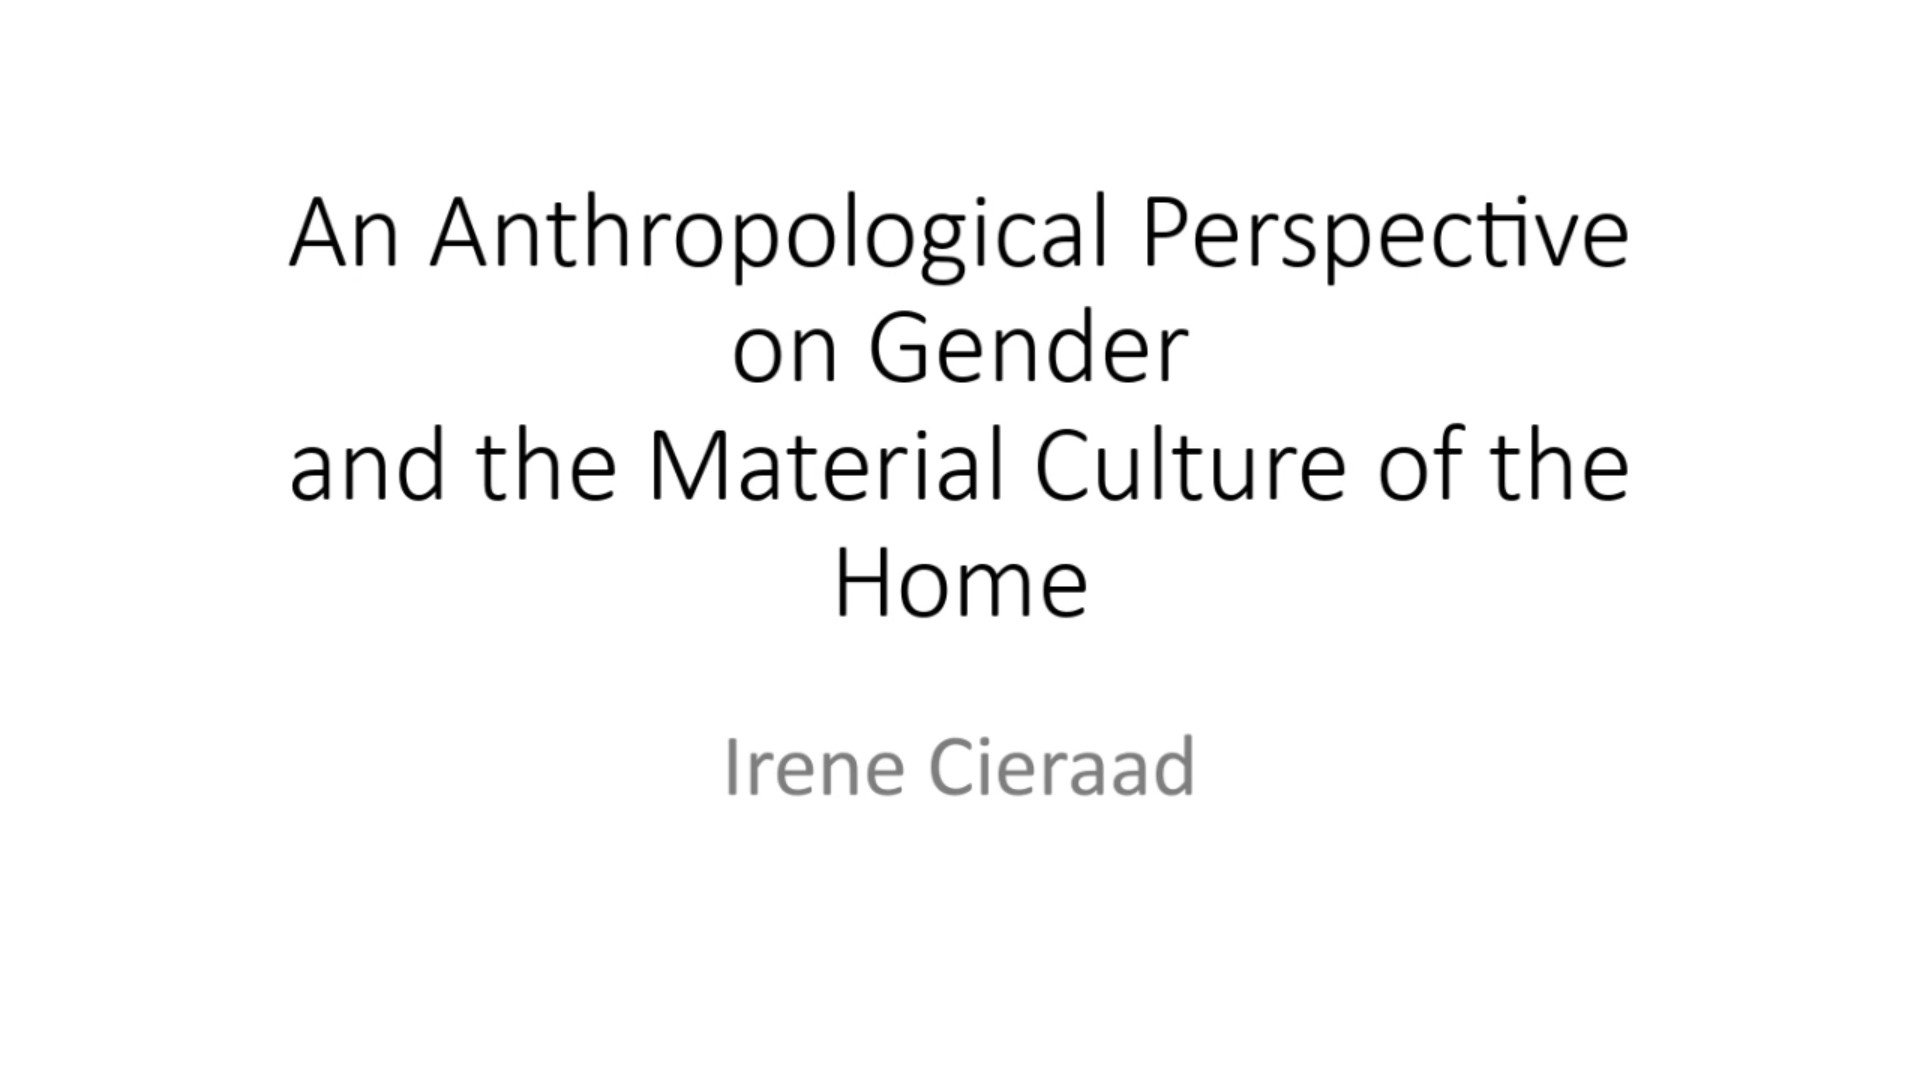 Vortrag “An anthropological perspective on gender and the material culture of the home” by Irene Cieraad